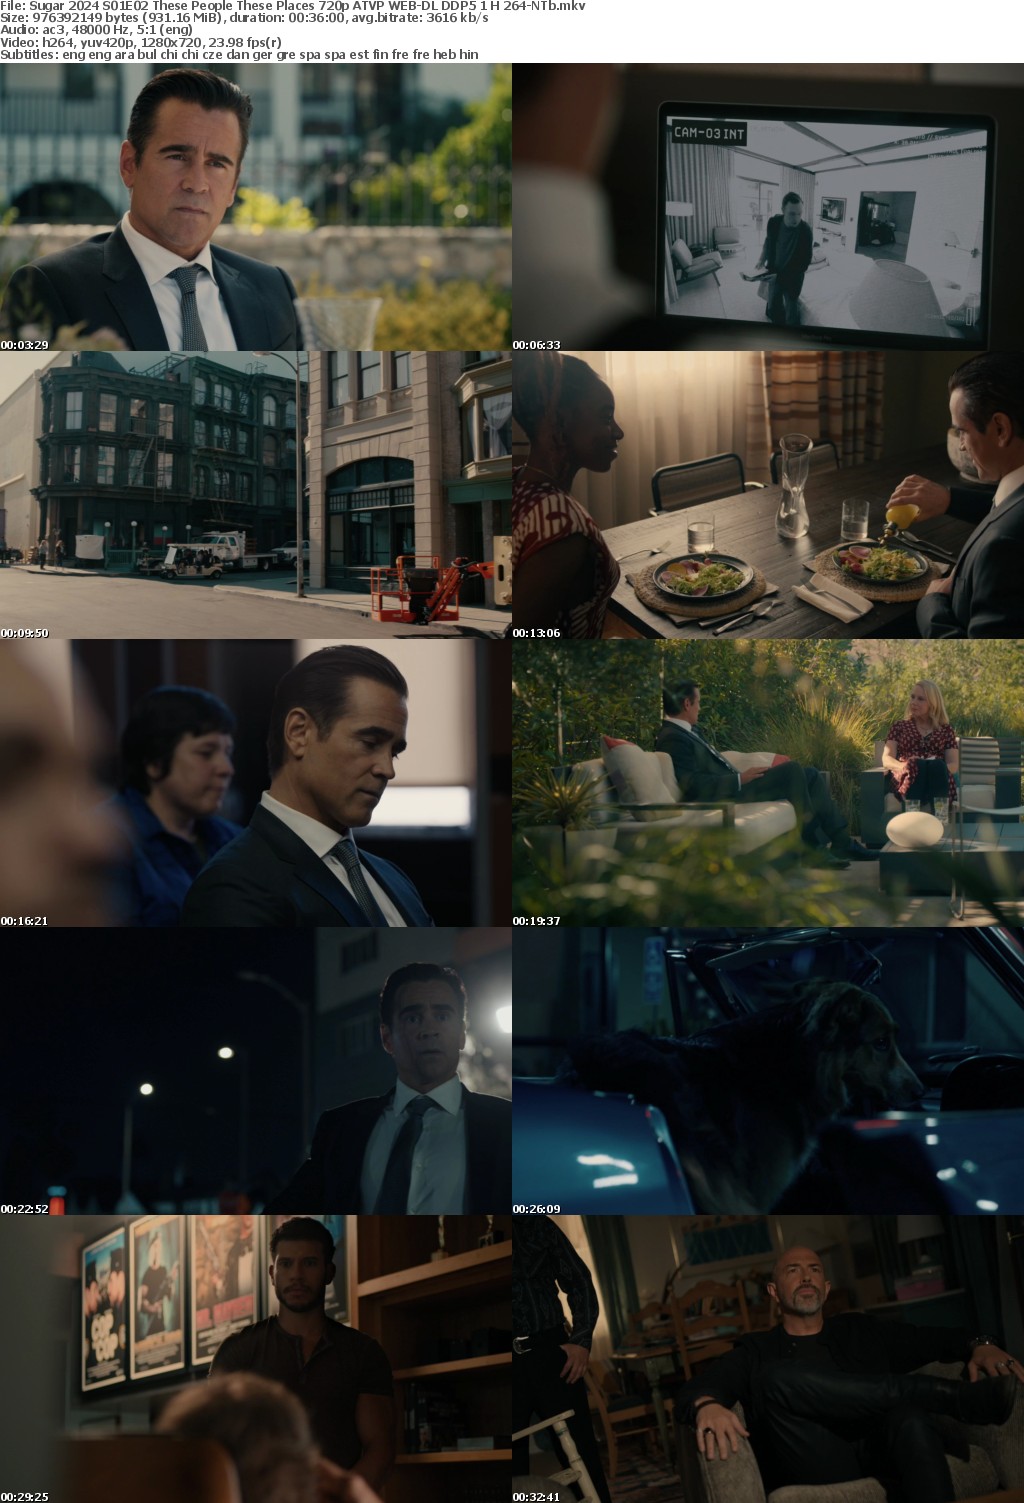 Sugar 2024 S01E02 These People These Places 720p ATVP WEB-DL DDP5 1 H 264-NTb